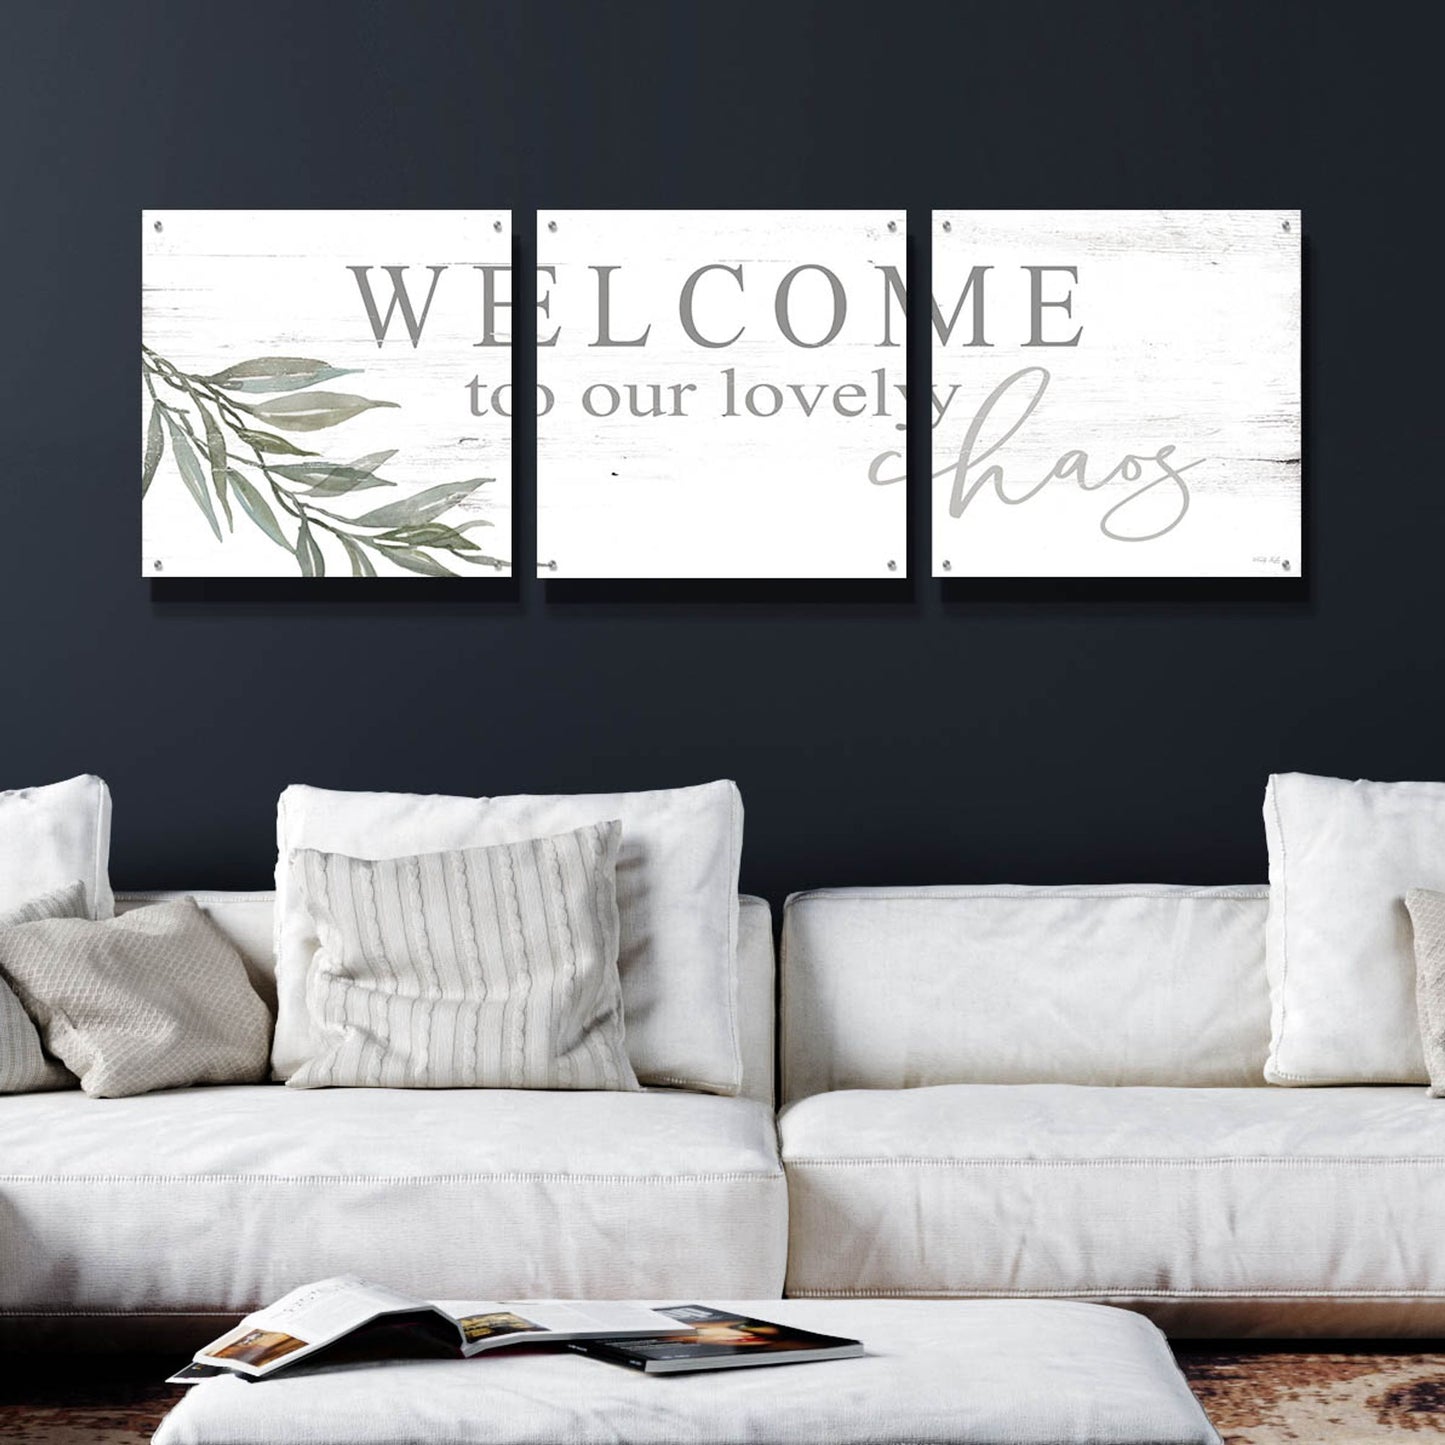 Epic Art 'Welcome to Our Lovely Chaos' by Cindy Jacobs, Acrylic Glass Wall Art, 3 Piece Set,72x24